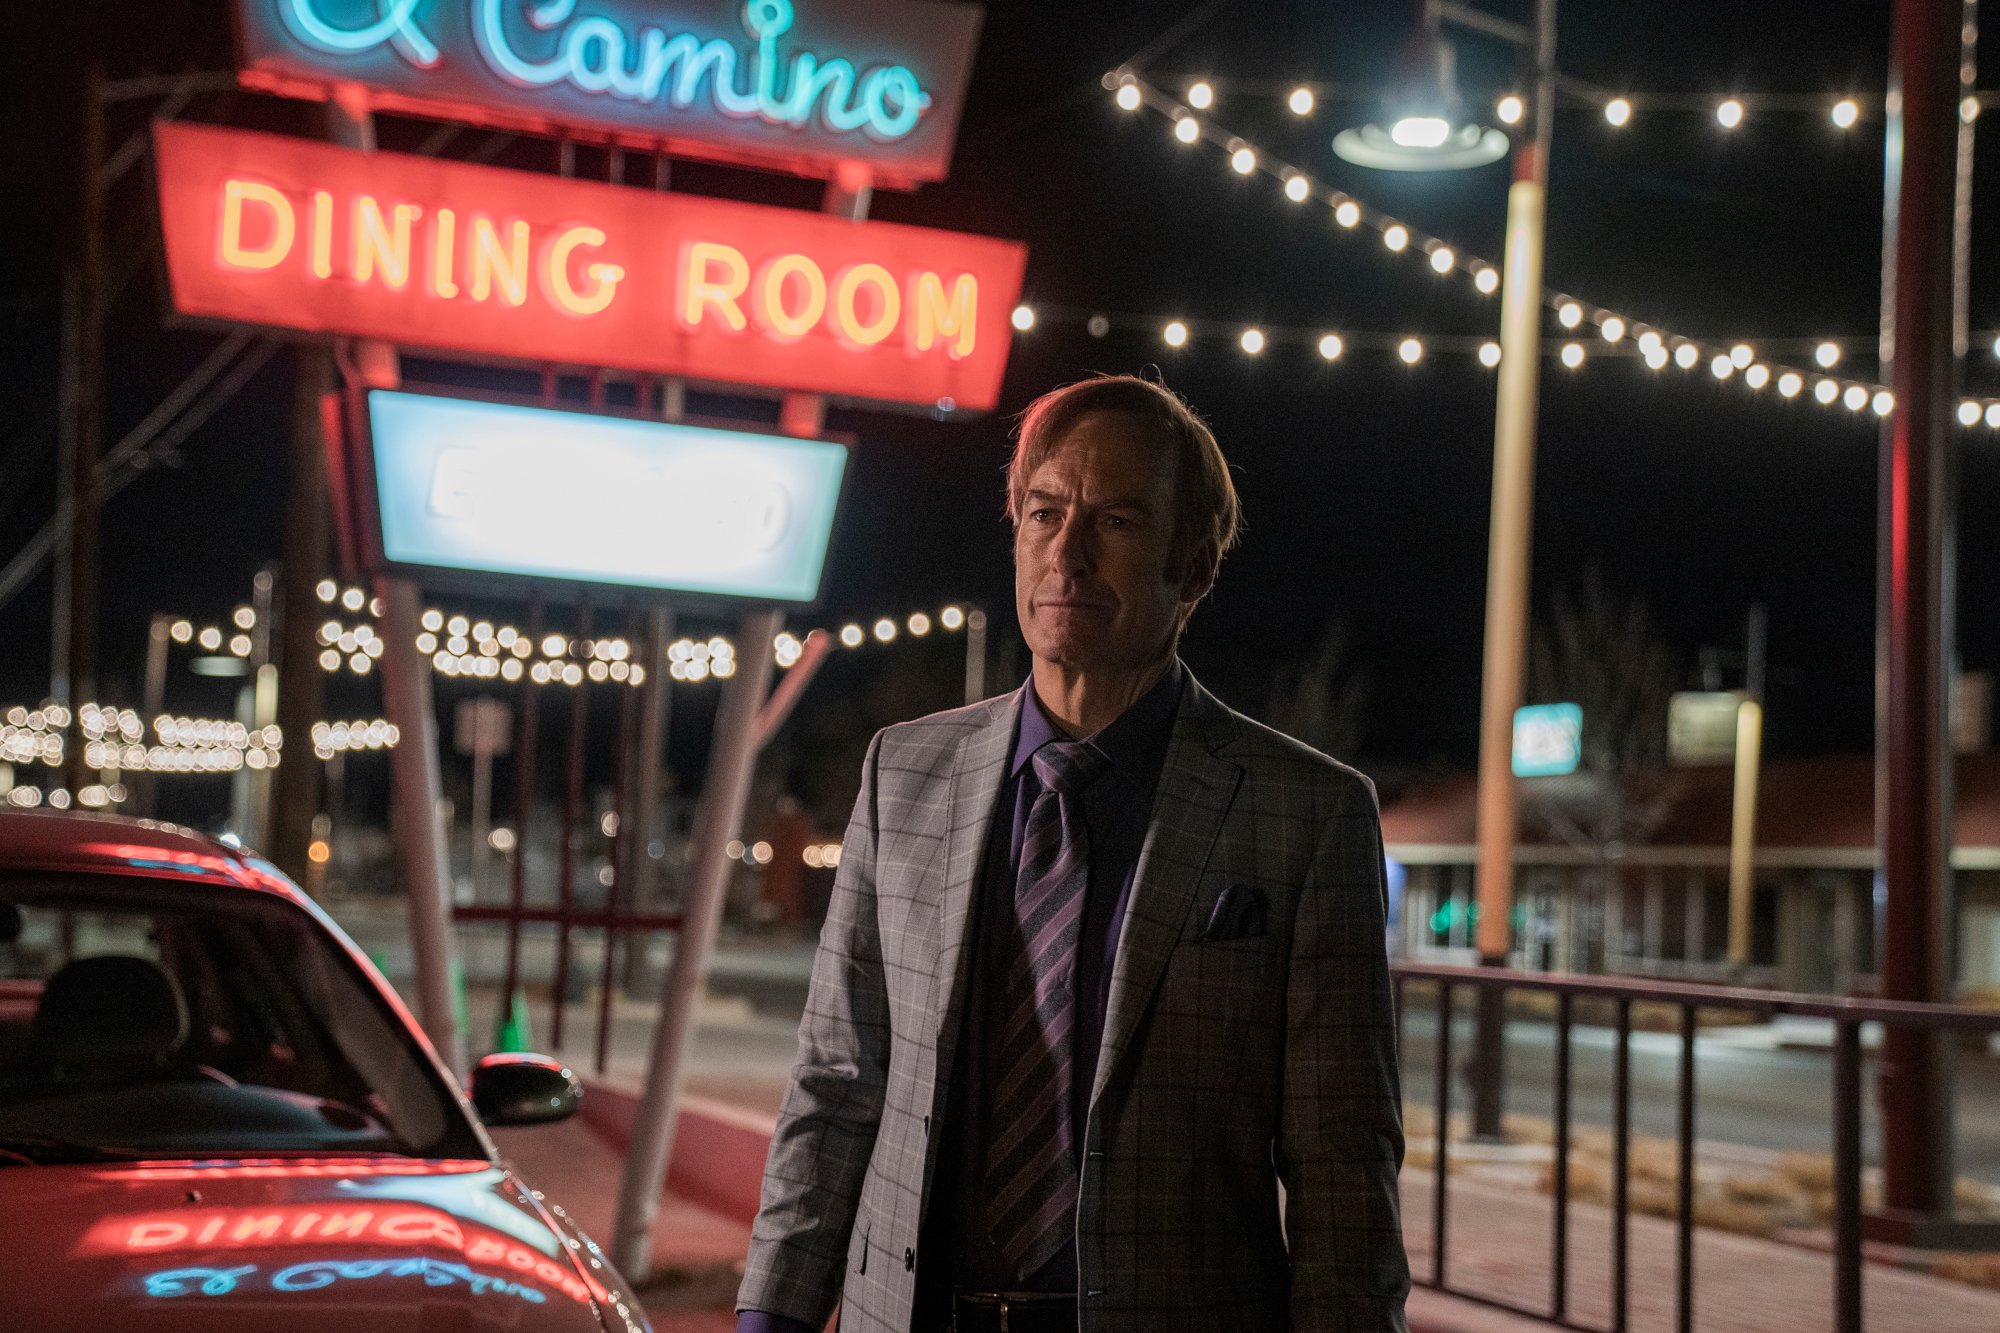 Bob Odenirk as Jimmy McGill/Saul Goodman in 'Better Call Saul' Season 6 Episode 1. He's standing in front of a lit-up sign that says 'El Camino Dining Room'